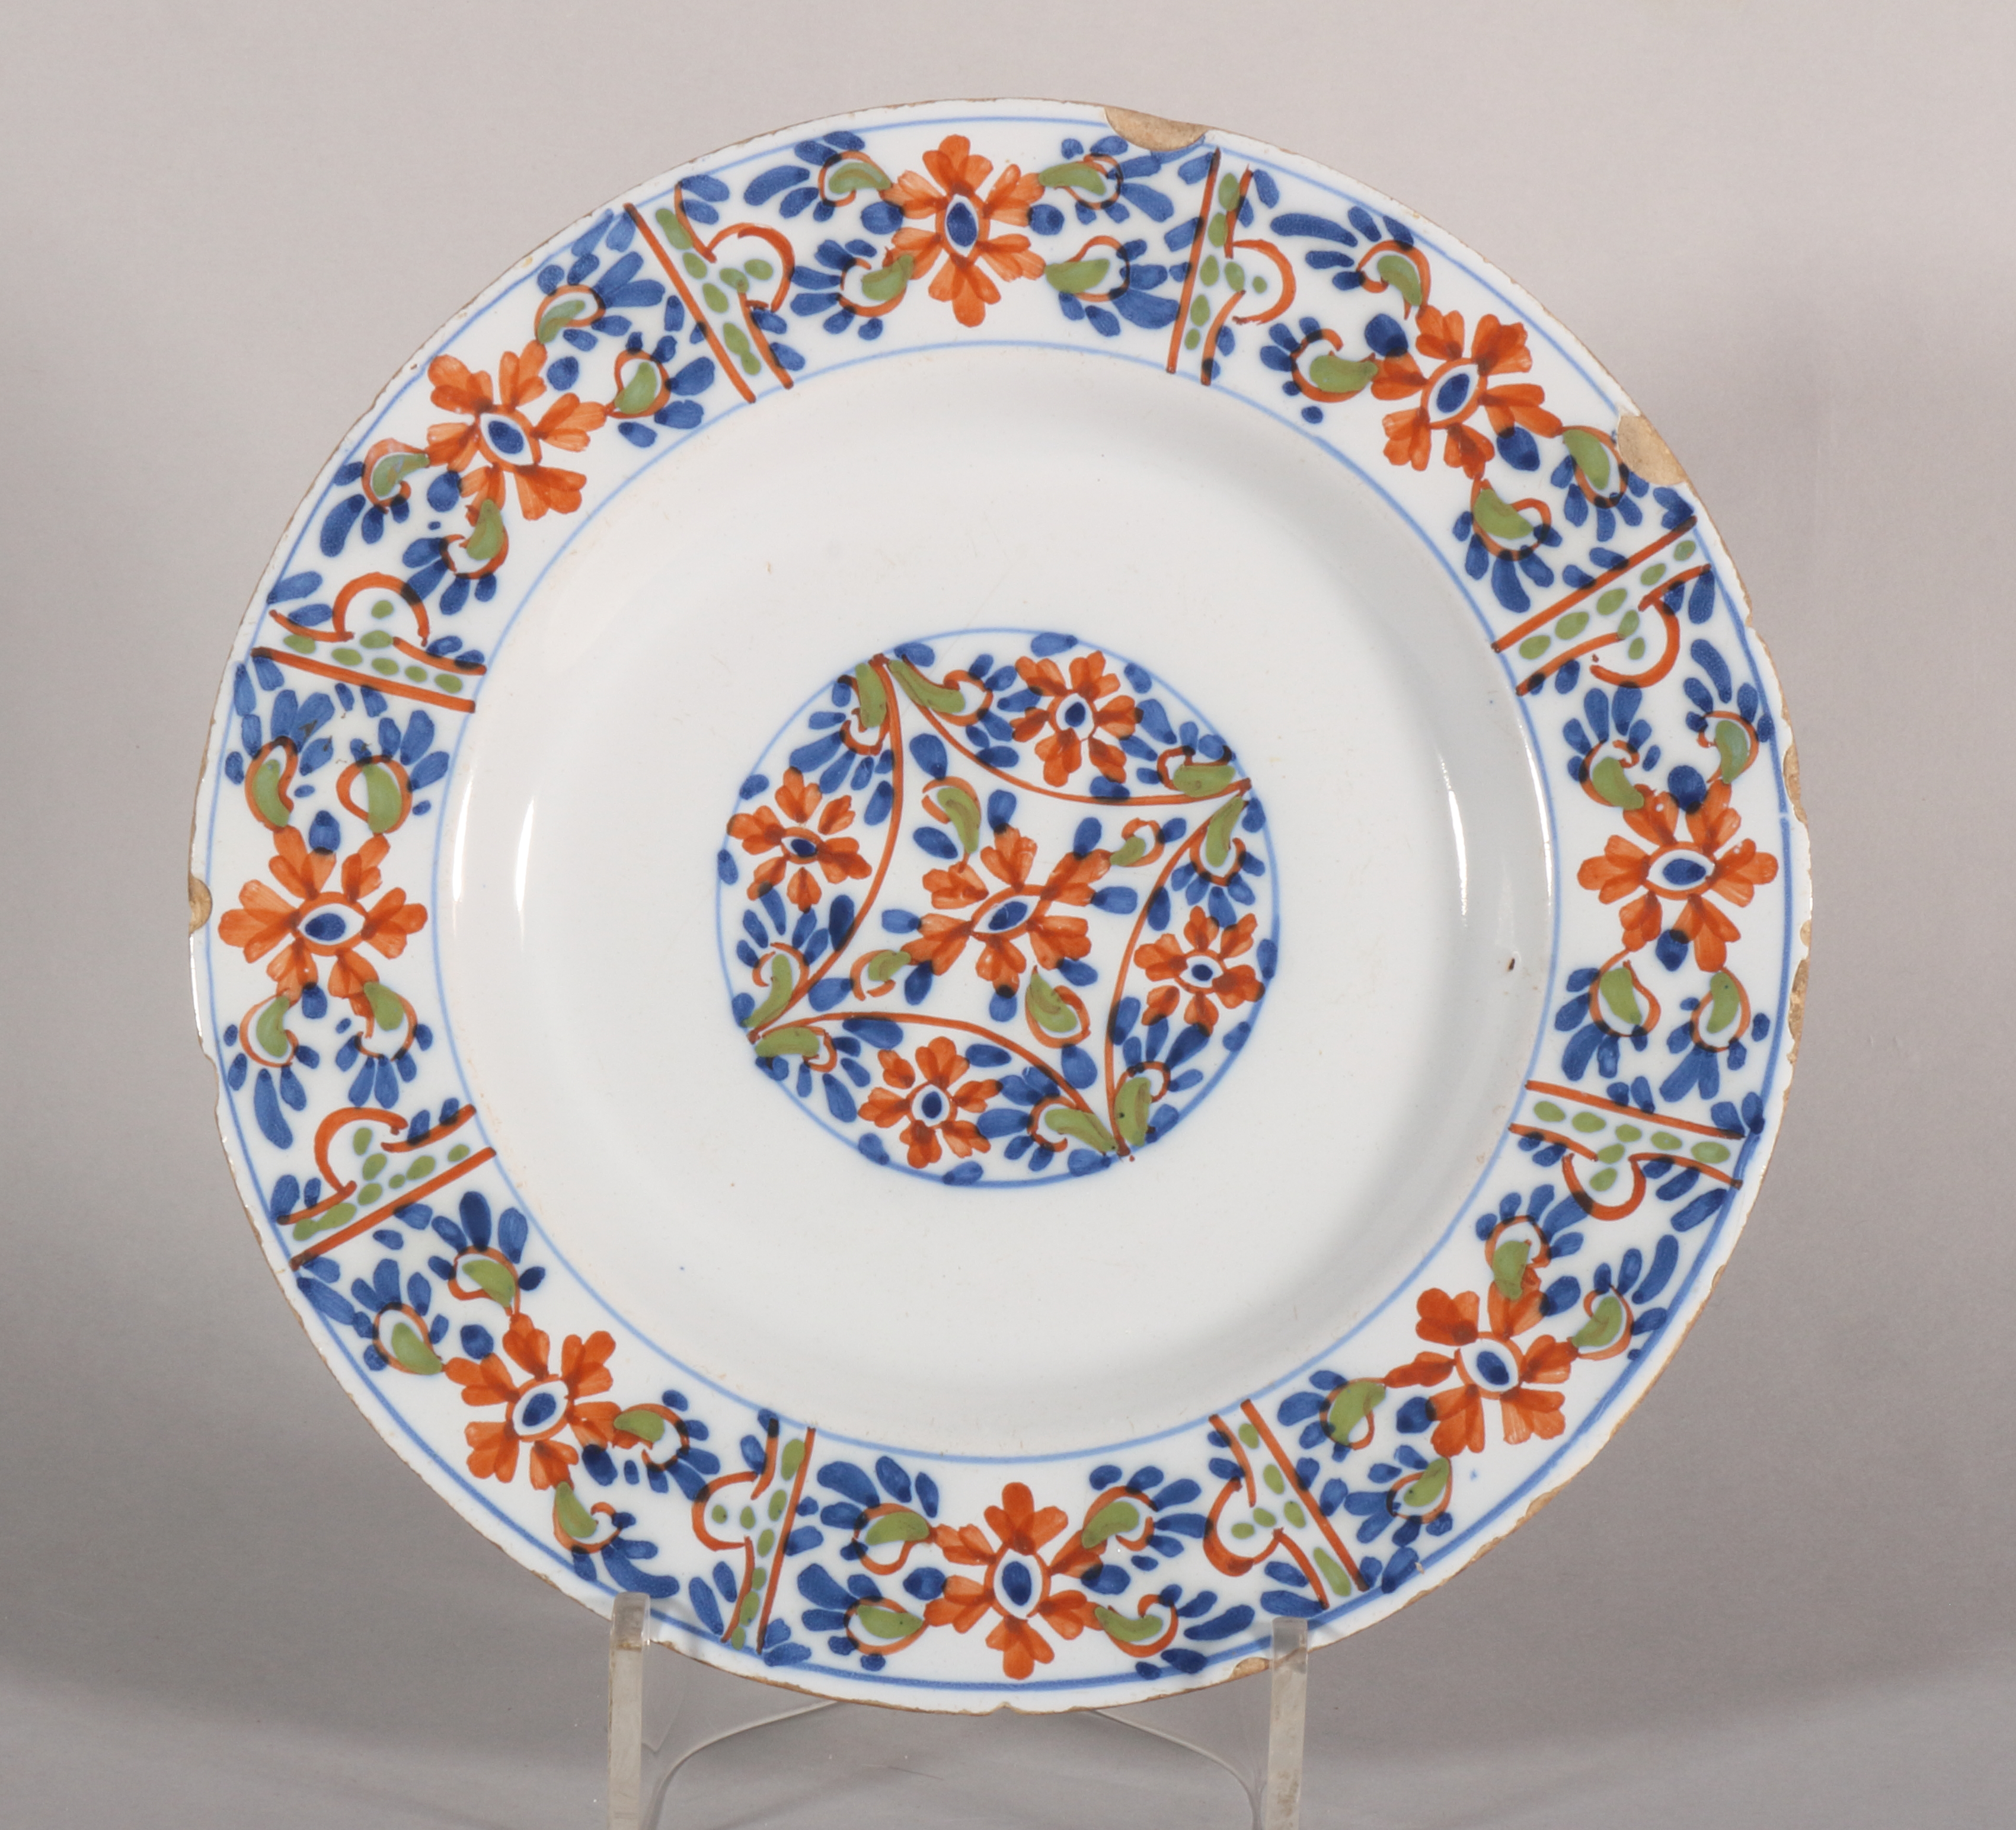 An 18th century Scottish/Lambeth? delft polychrome plate with geometric floral decoration, 9" dia [